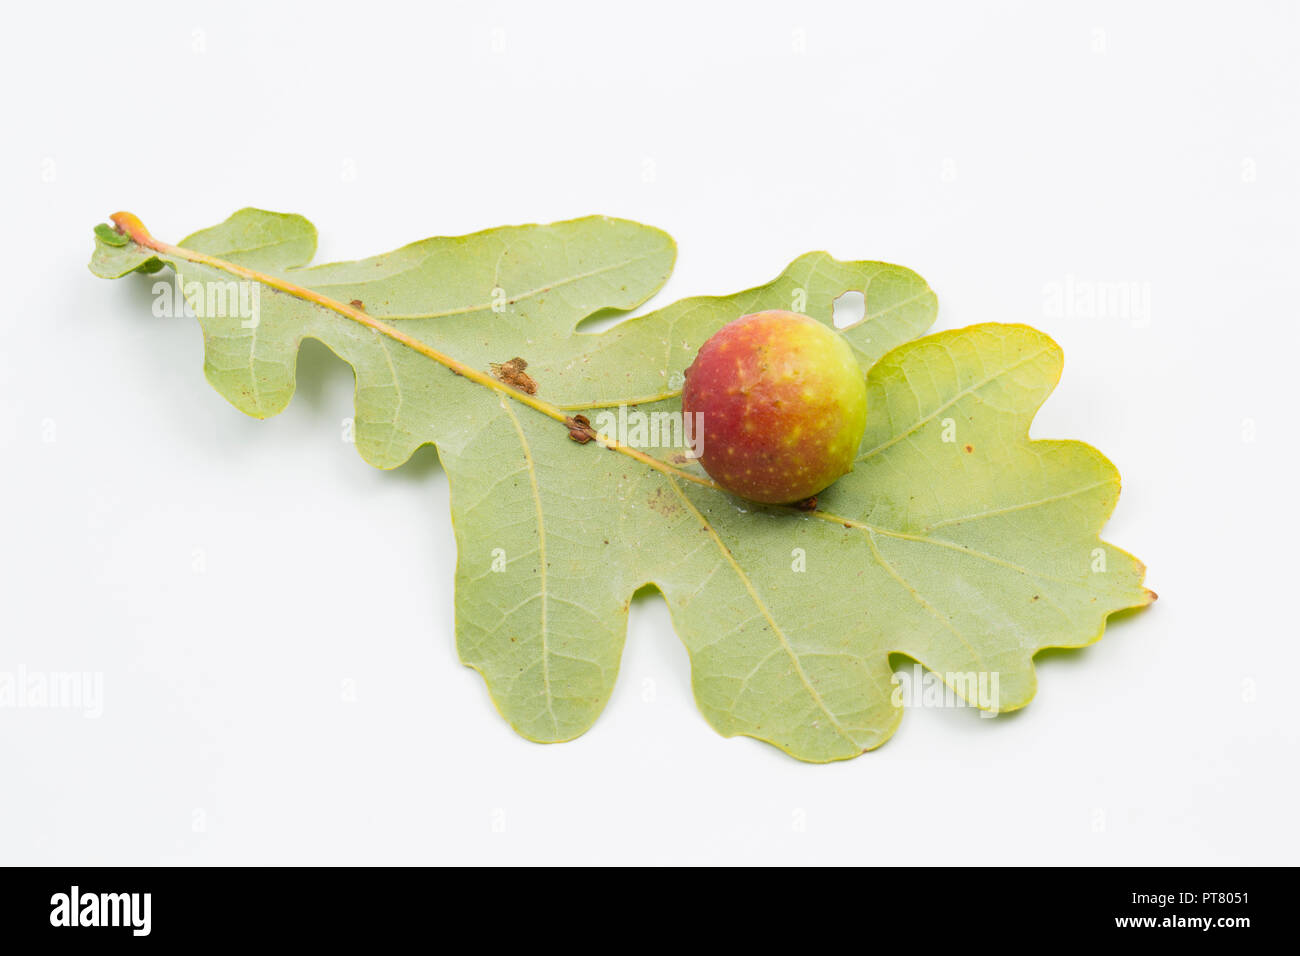 A Cherry gall, caused by the gall wasp Cynips quercusfolii, growing on the leaf of a common oak, Quercus robur. Studio picture on a white background.  Stock Photo